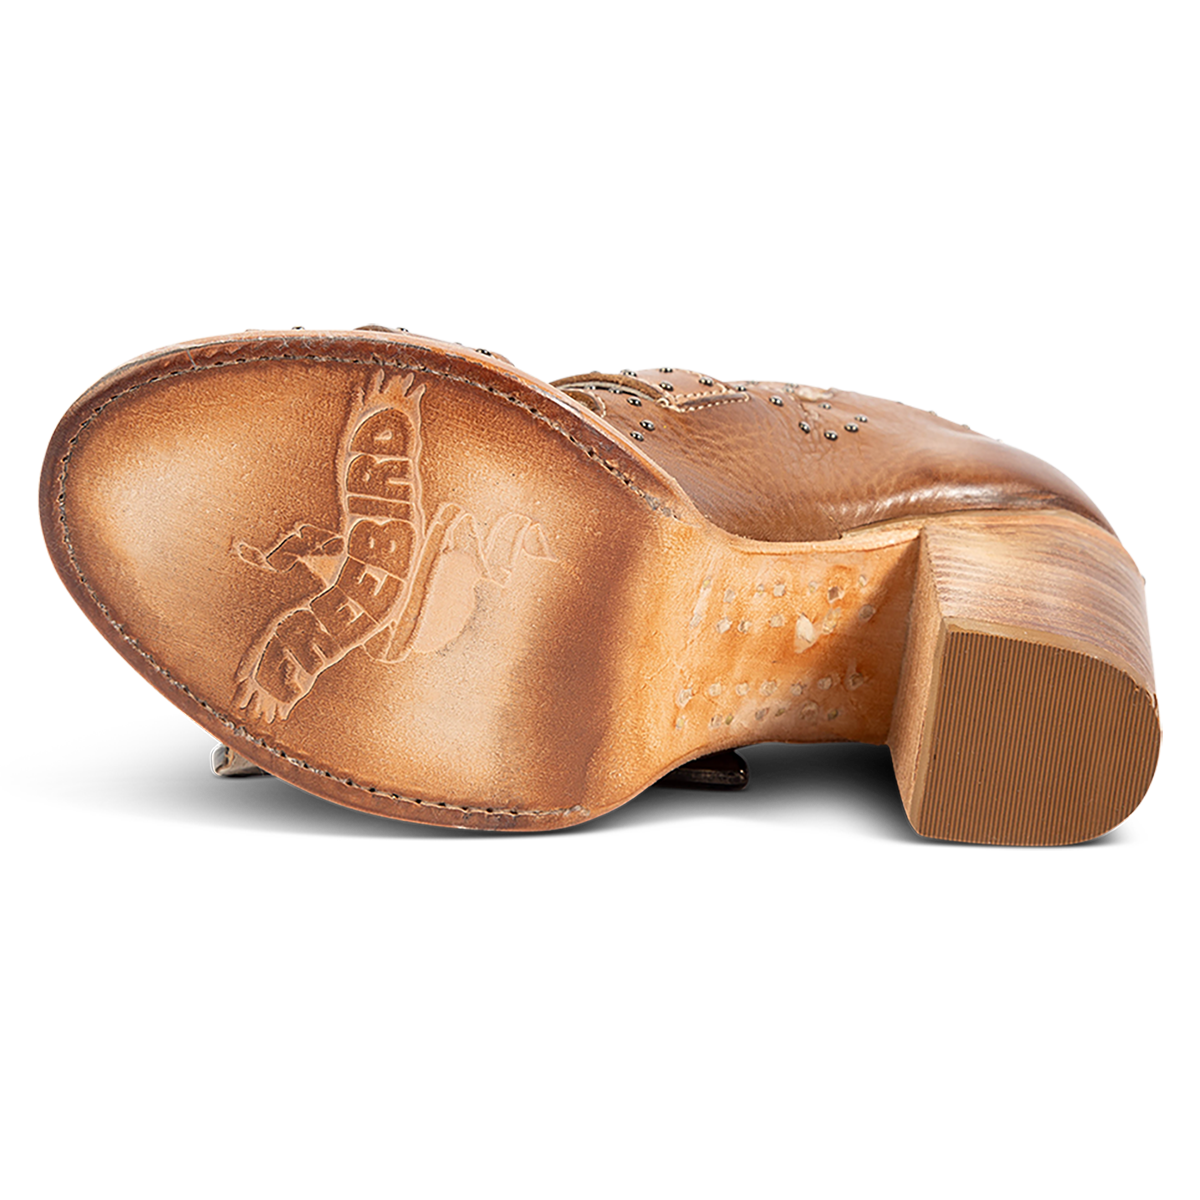 Leather sole imprinted with FREEBIRD on Violet women's wheat leather sandal